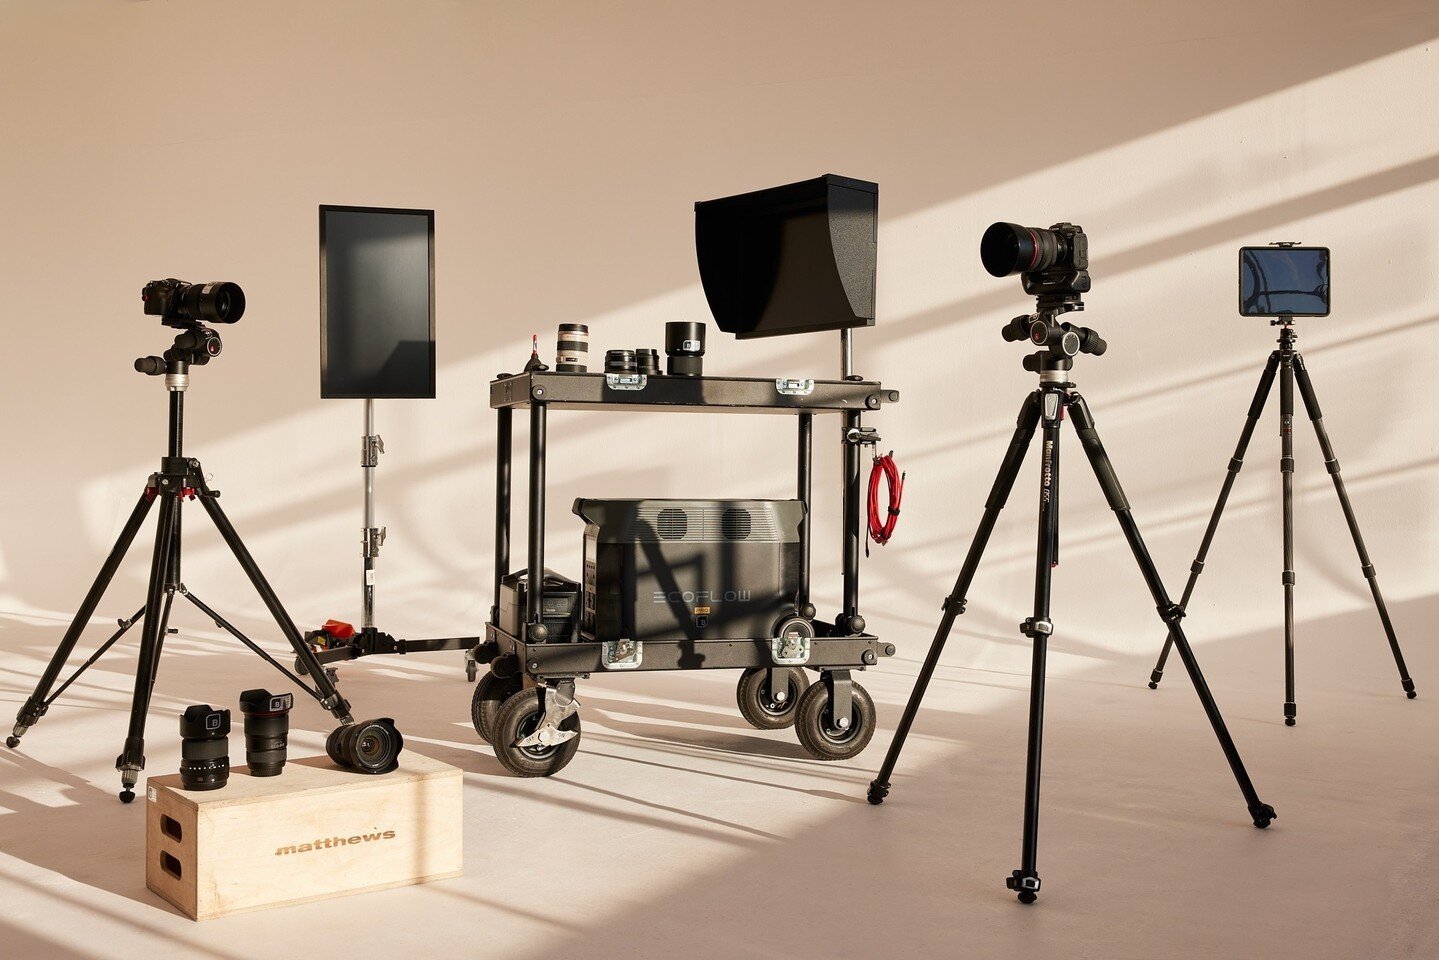 Get all your digital hire needs here @broadscopestudios ⁠
⁠
Whether its on location and you require power and a portable digital set-up or in studio, we have several stills camera kits and equipment options available to suit your shoots needs. ⁠
⁠
- 